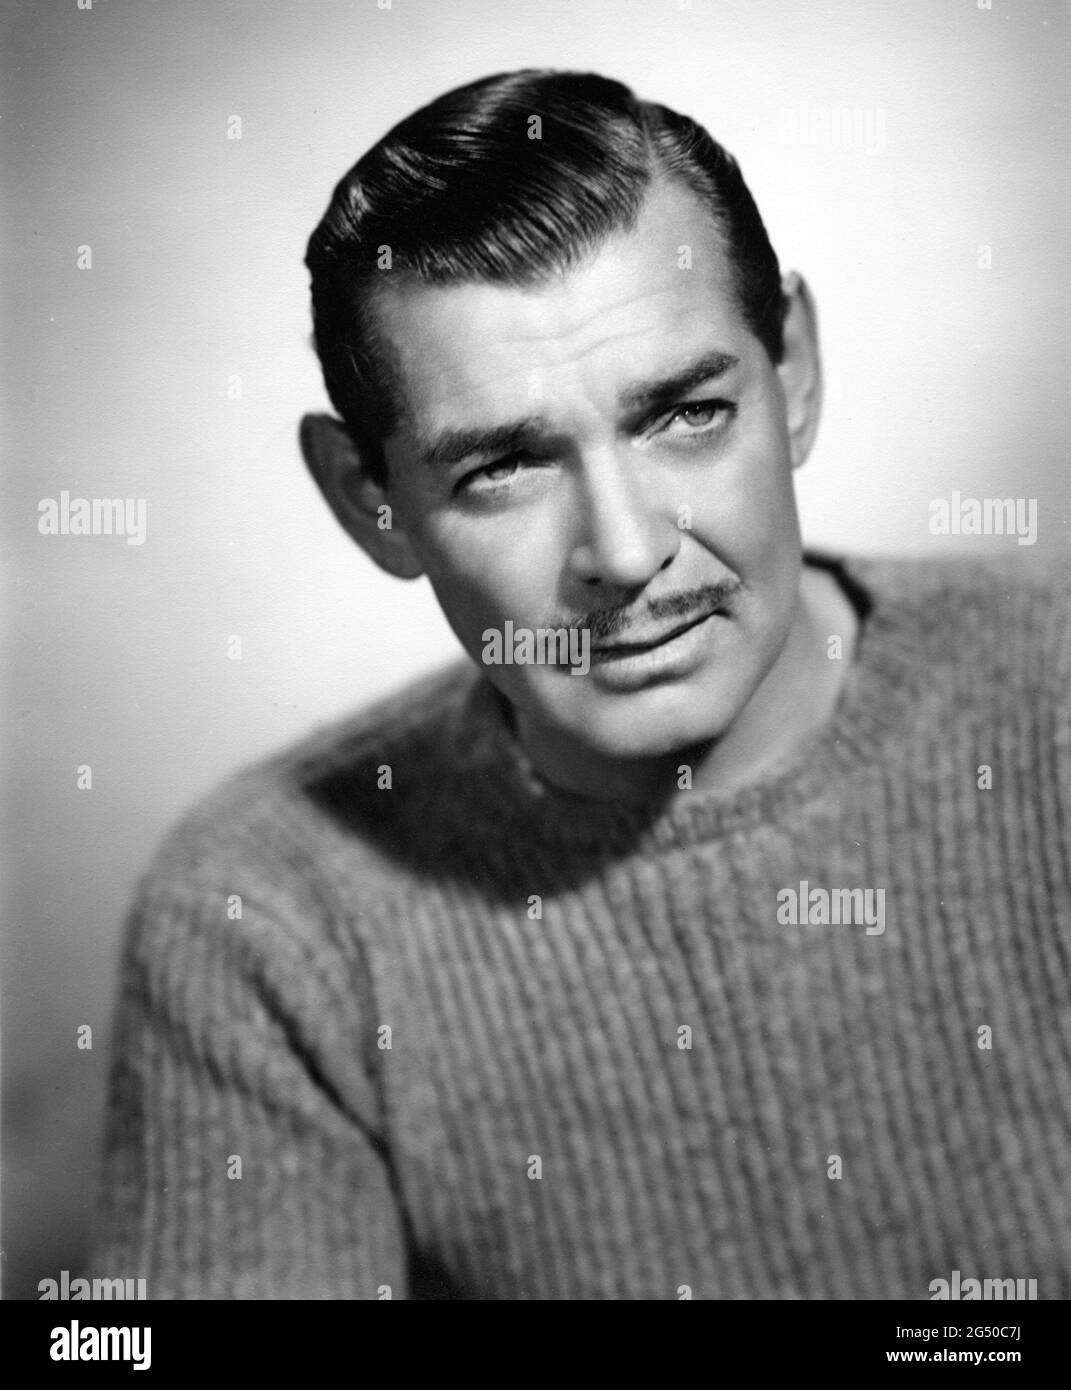 CLARK GABLE Portrait in NEVER LET ME GO 1953 director DELMER DAVES from novel Come The Dawn by Paul Winterton producer Clarence Brown Metro Goldwyn Mayer Stock Photo